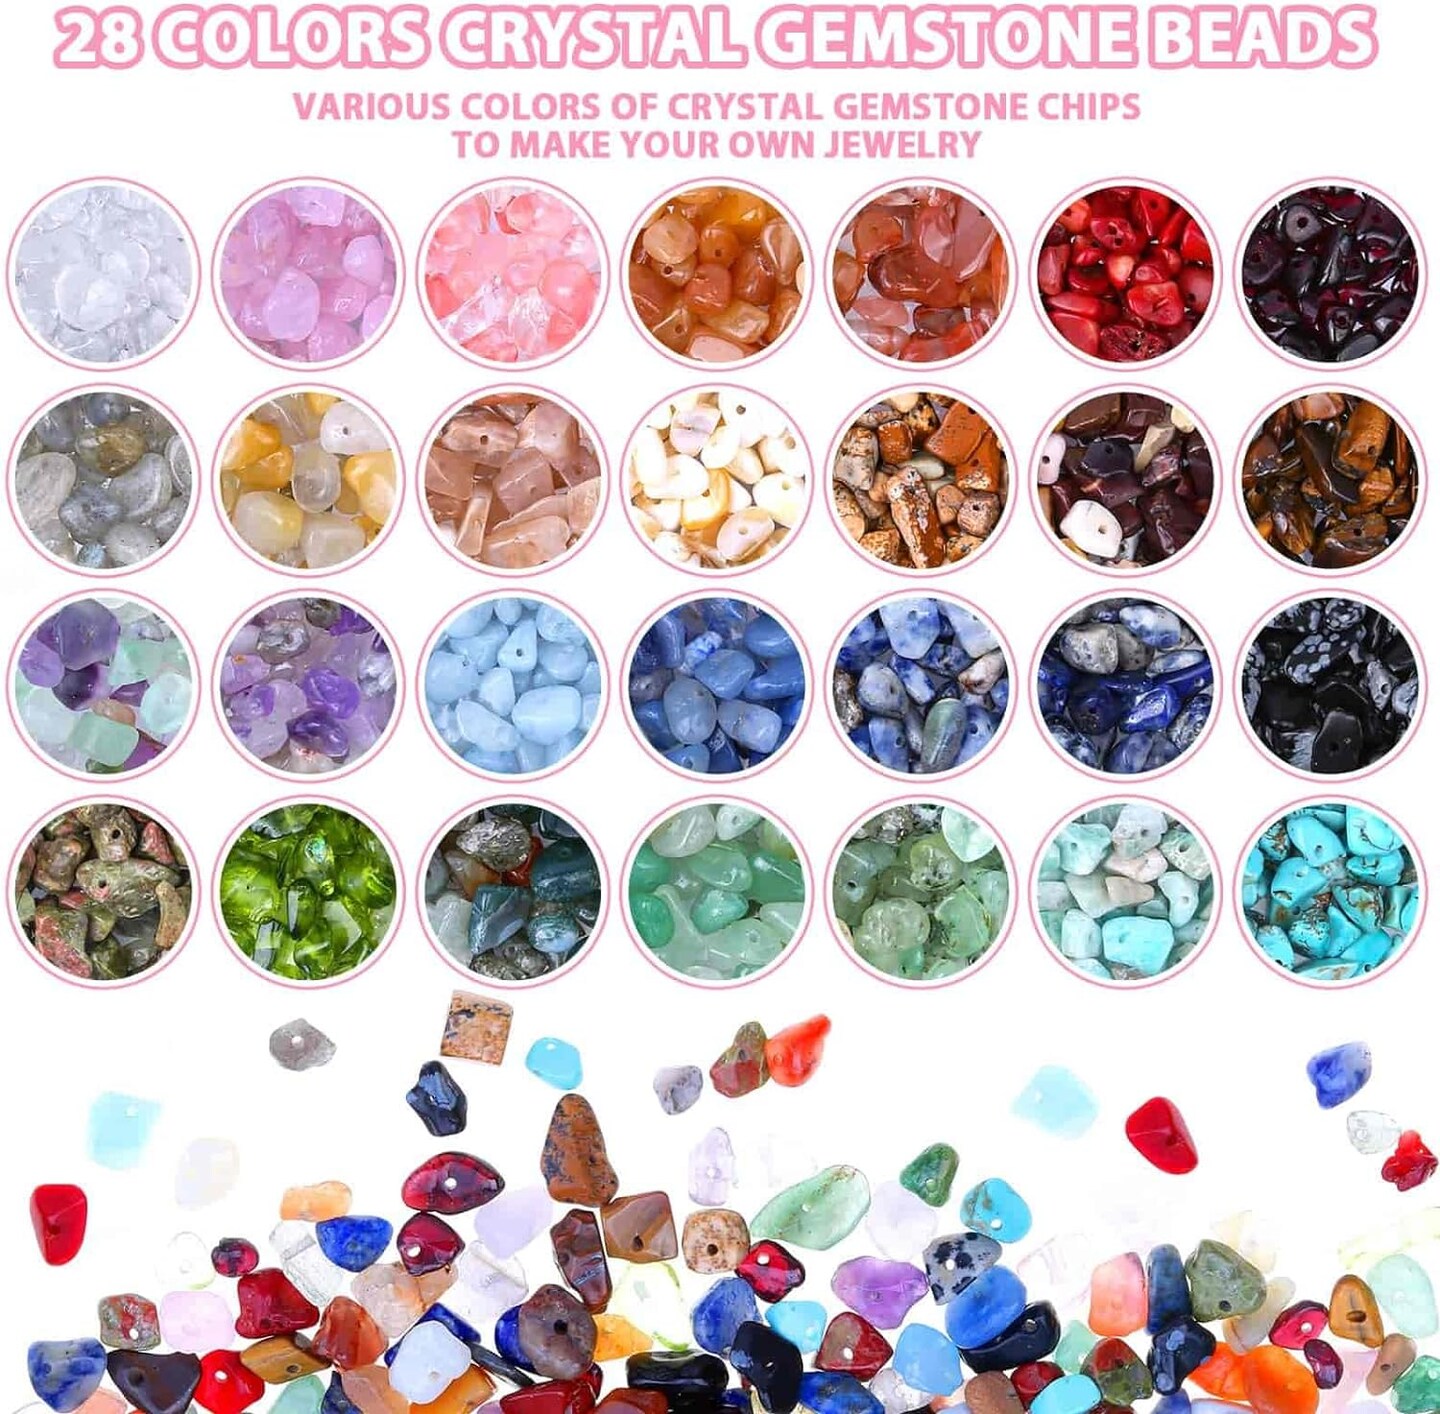 Ring Making Kit with Crystal Beads, 28 Colors Crystal Jewelry Making Kit with Crystals, Jewelry Wire, Pliers and Earring Making Supplies for Jewelry Making